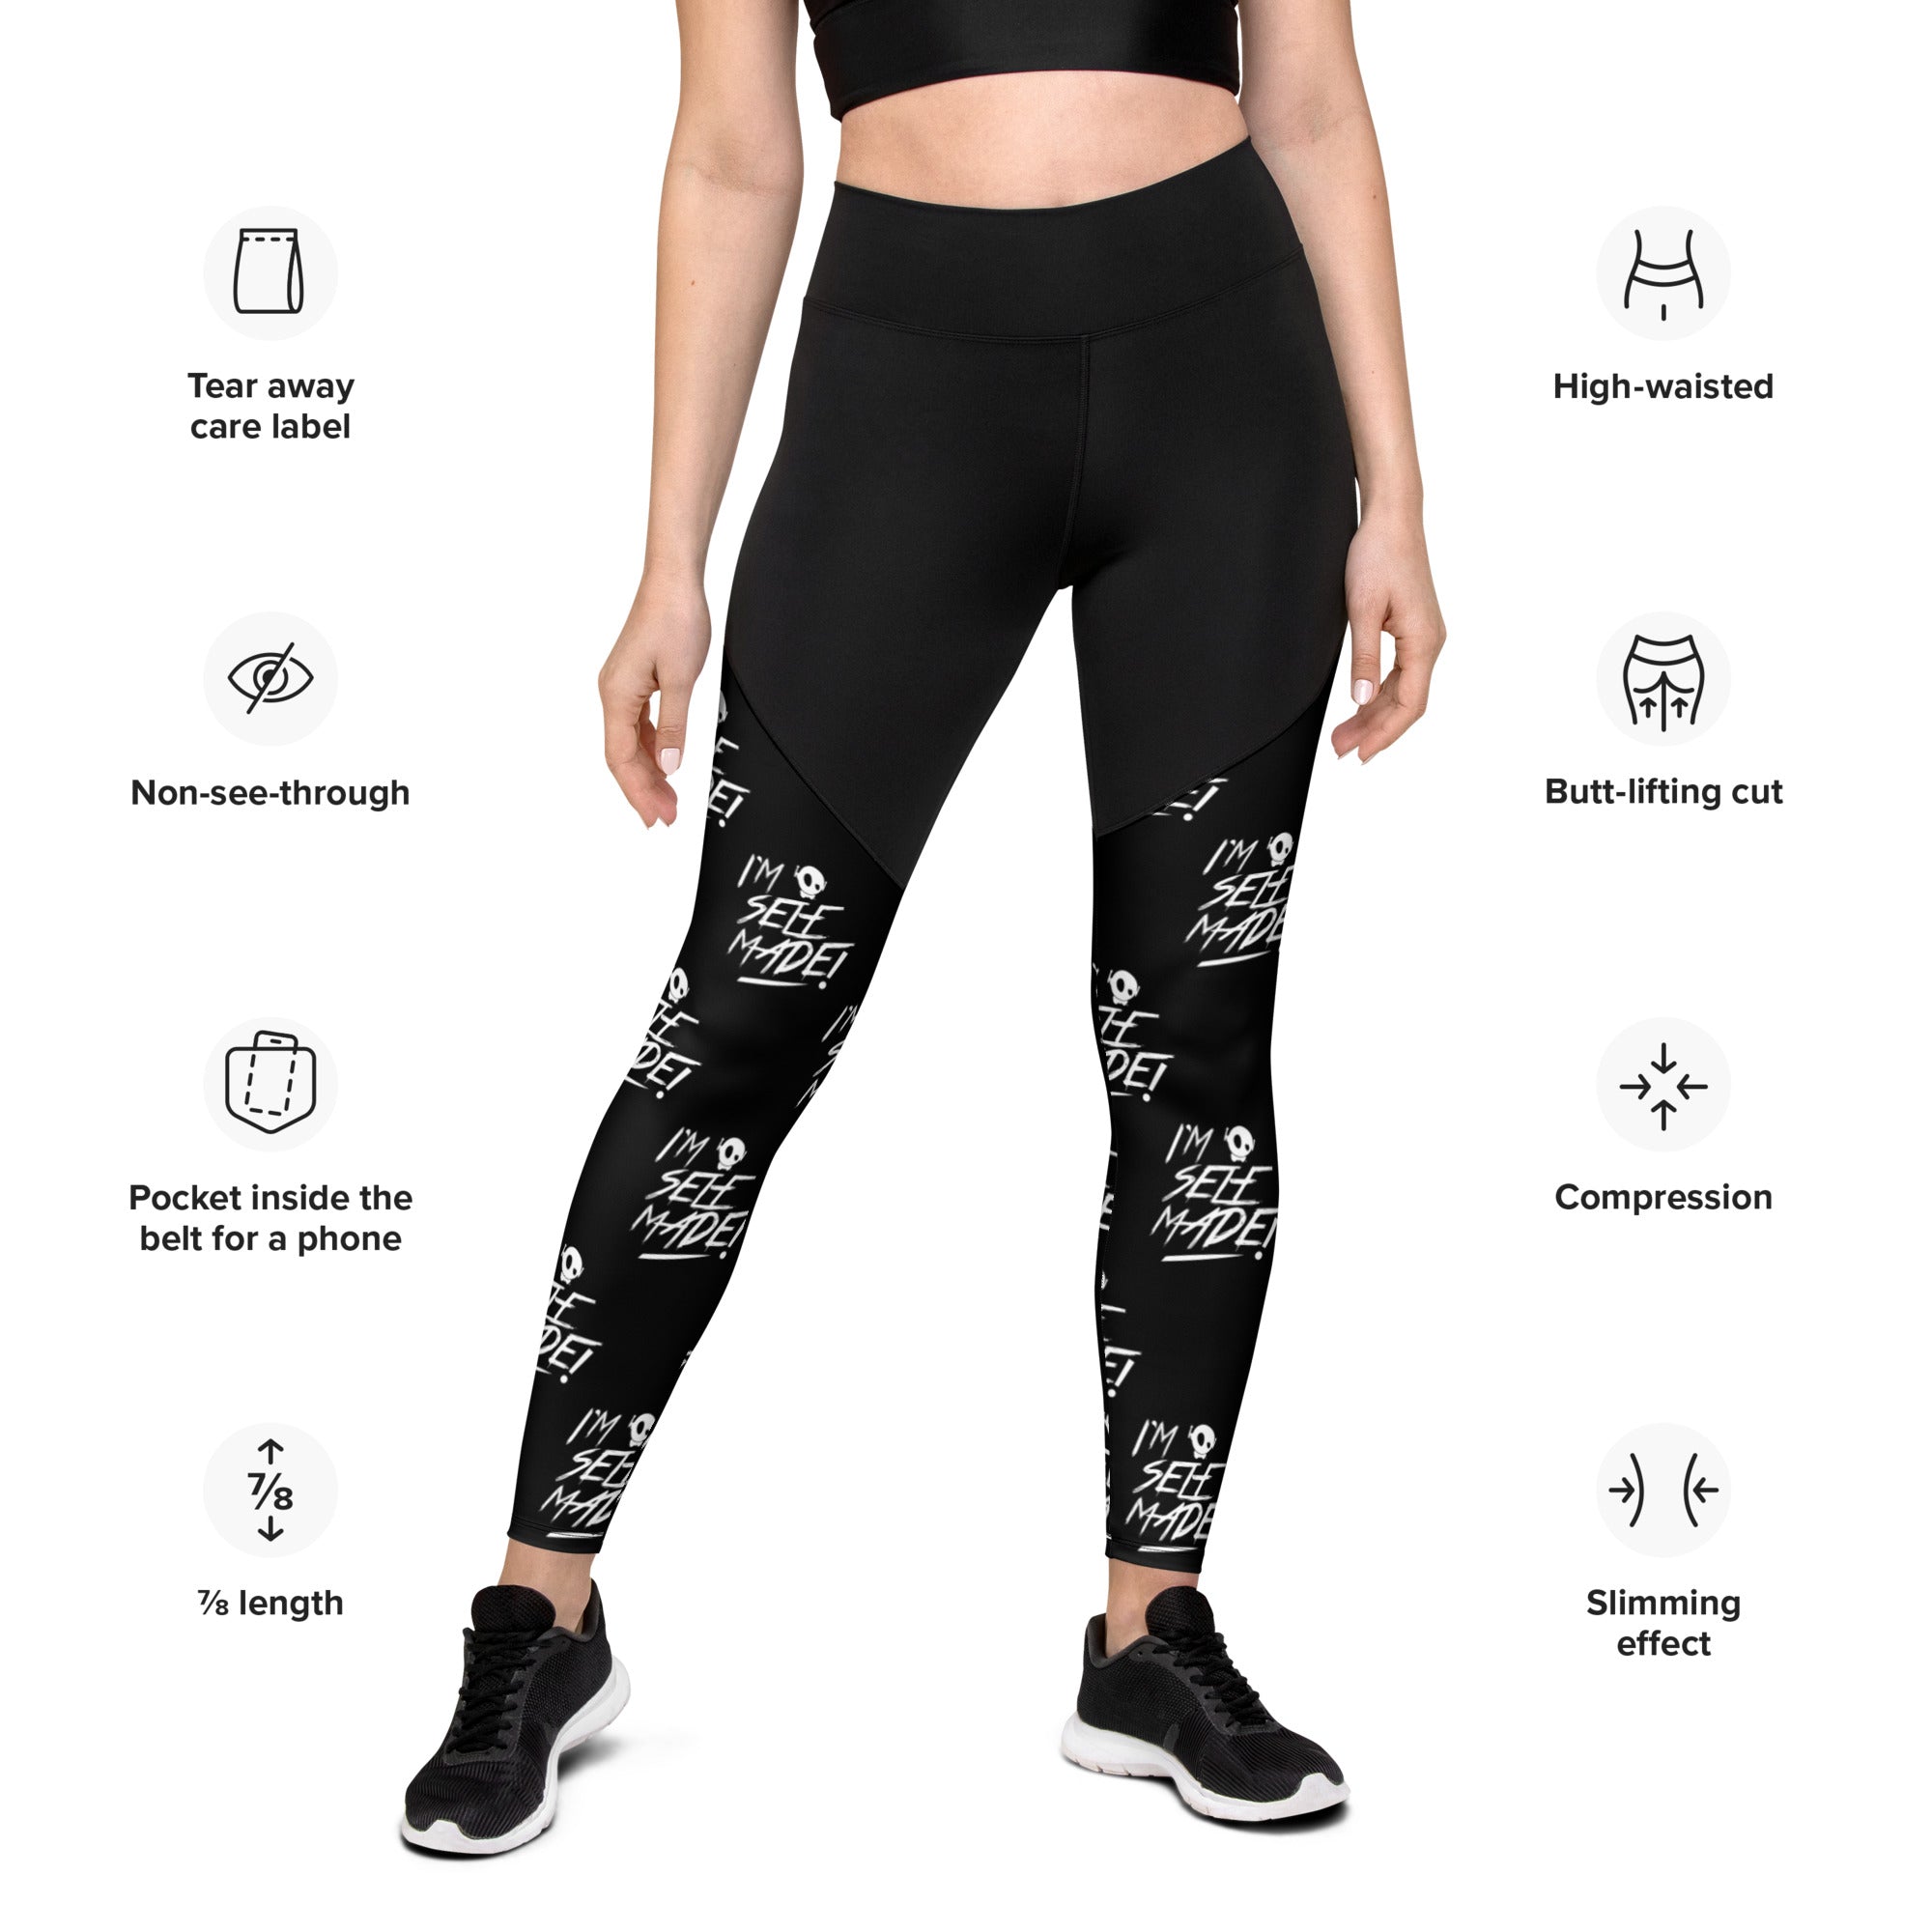 "SELF MADE!" ALL-OVER BLK SPORTS LEGGINGS